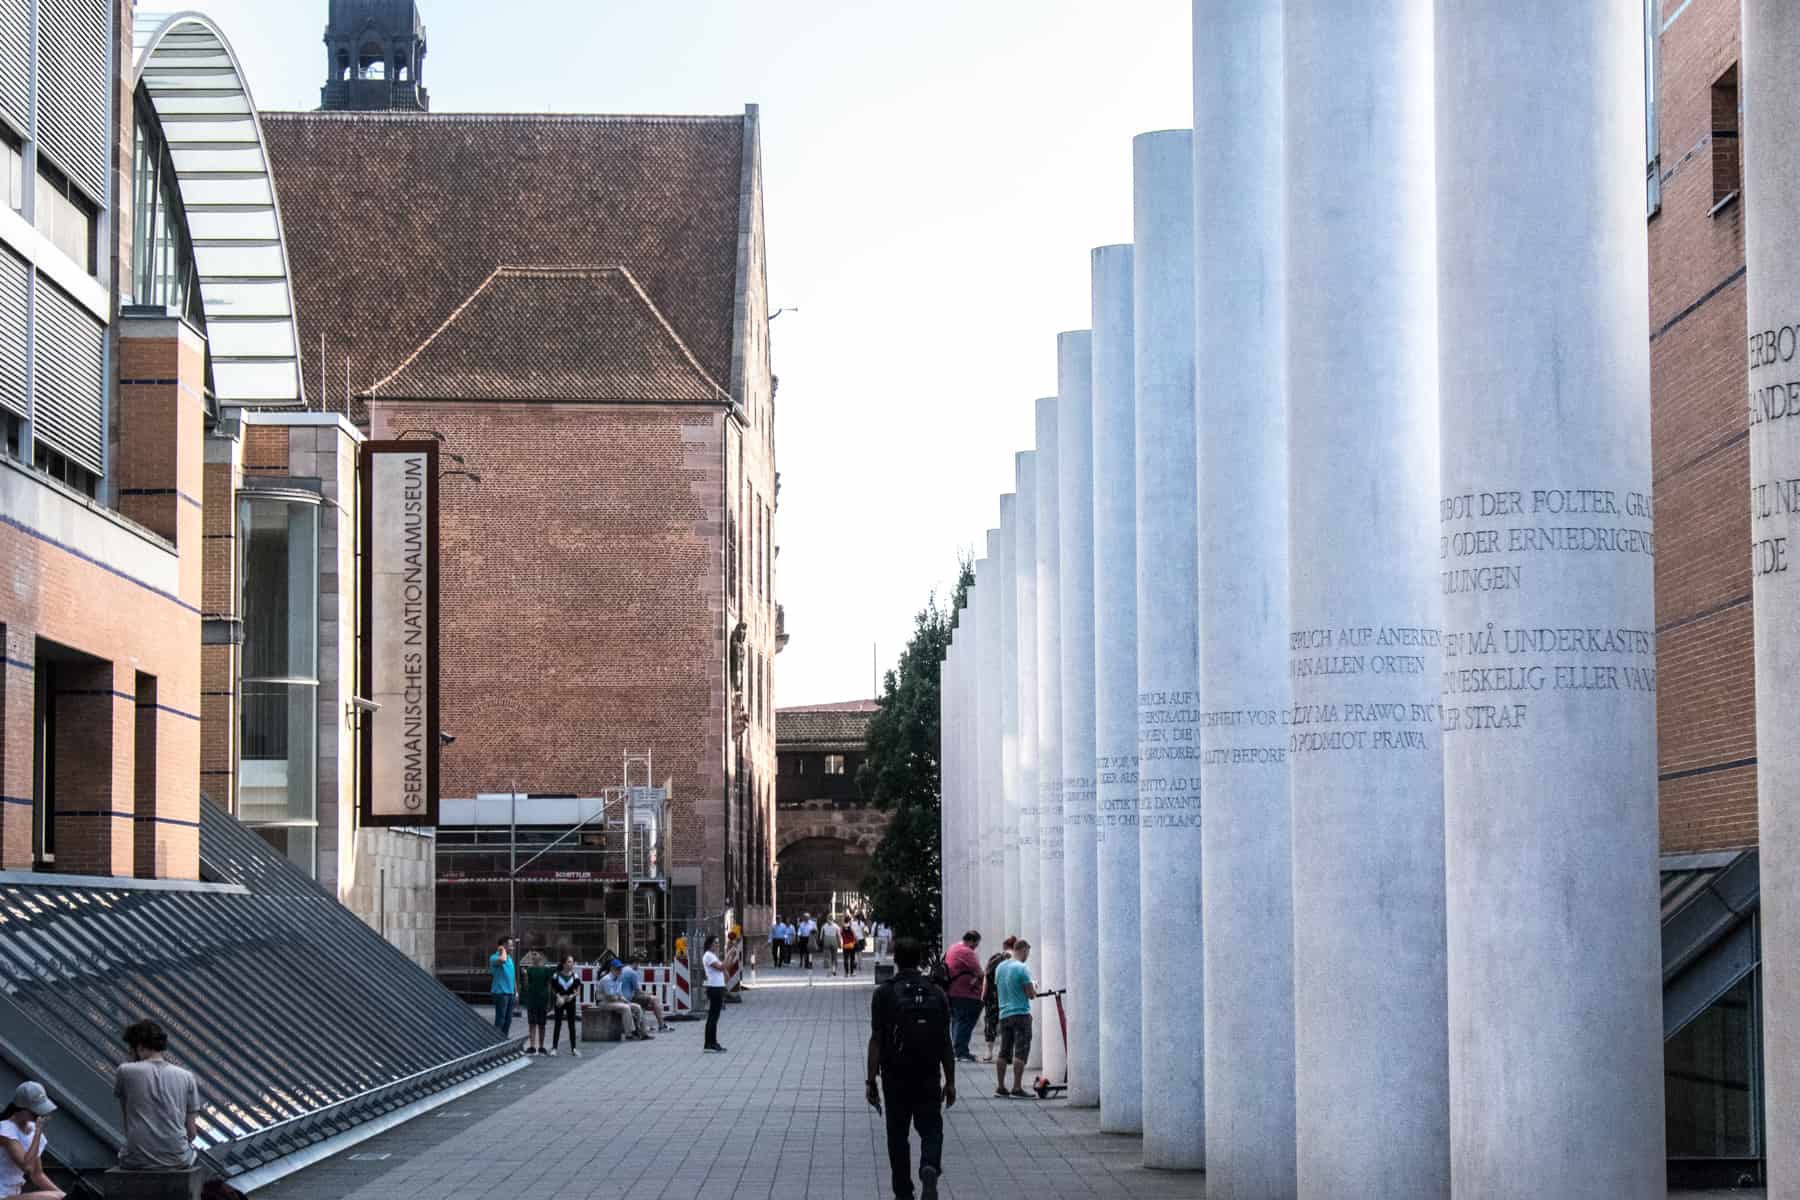 A view of the 27 white columns of the Way of Human Rights in Nuremberg as part of its standing as 'The City of Peace and Human Rights'